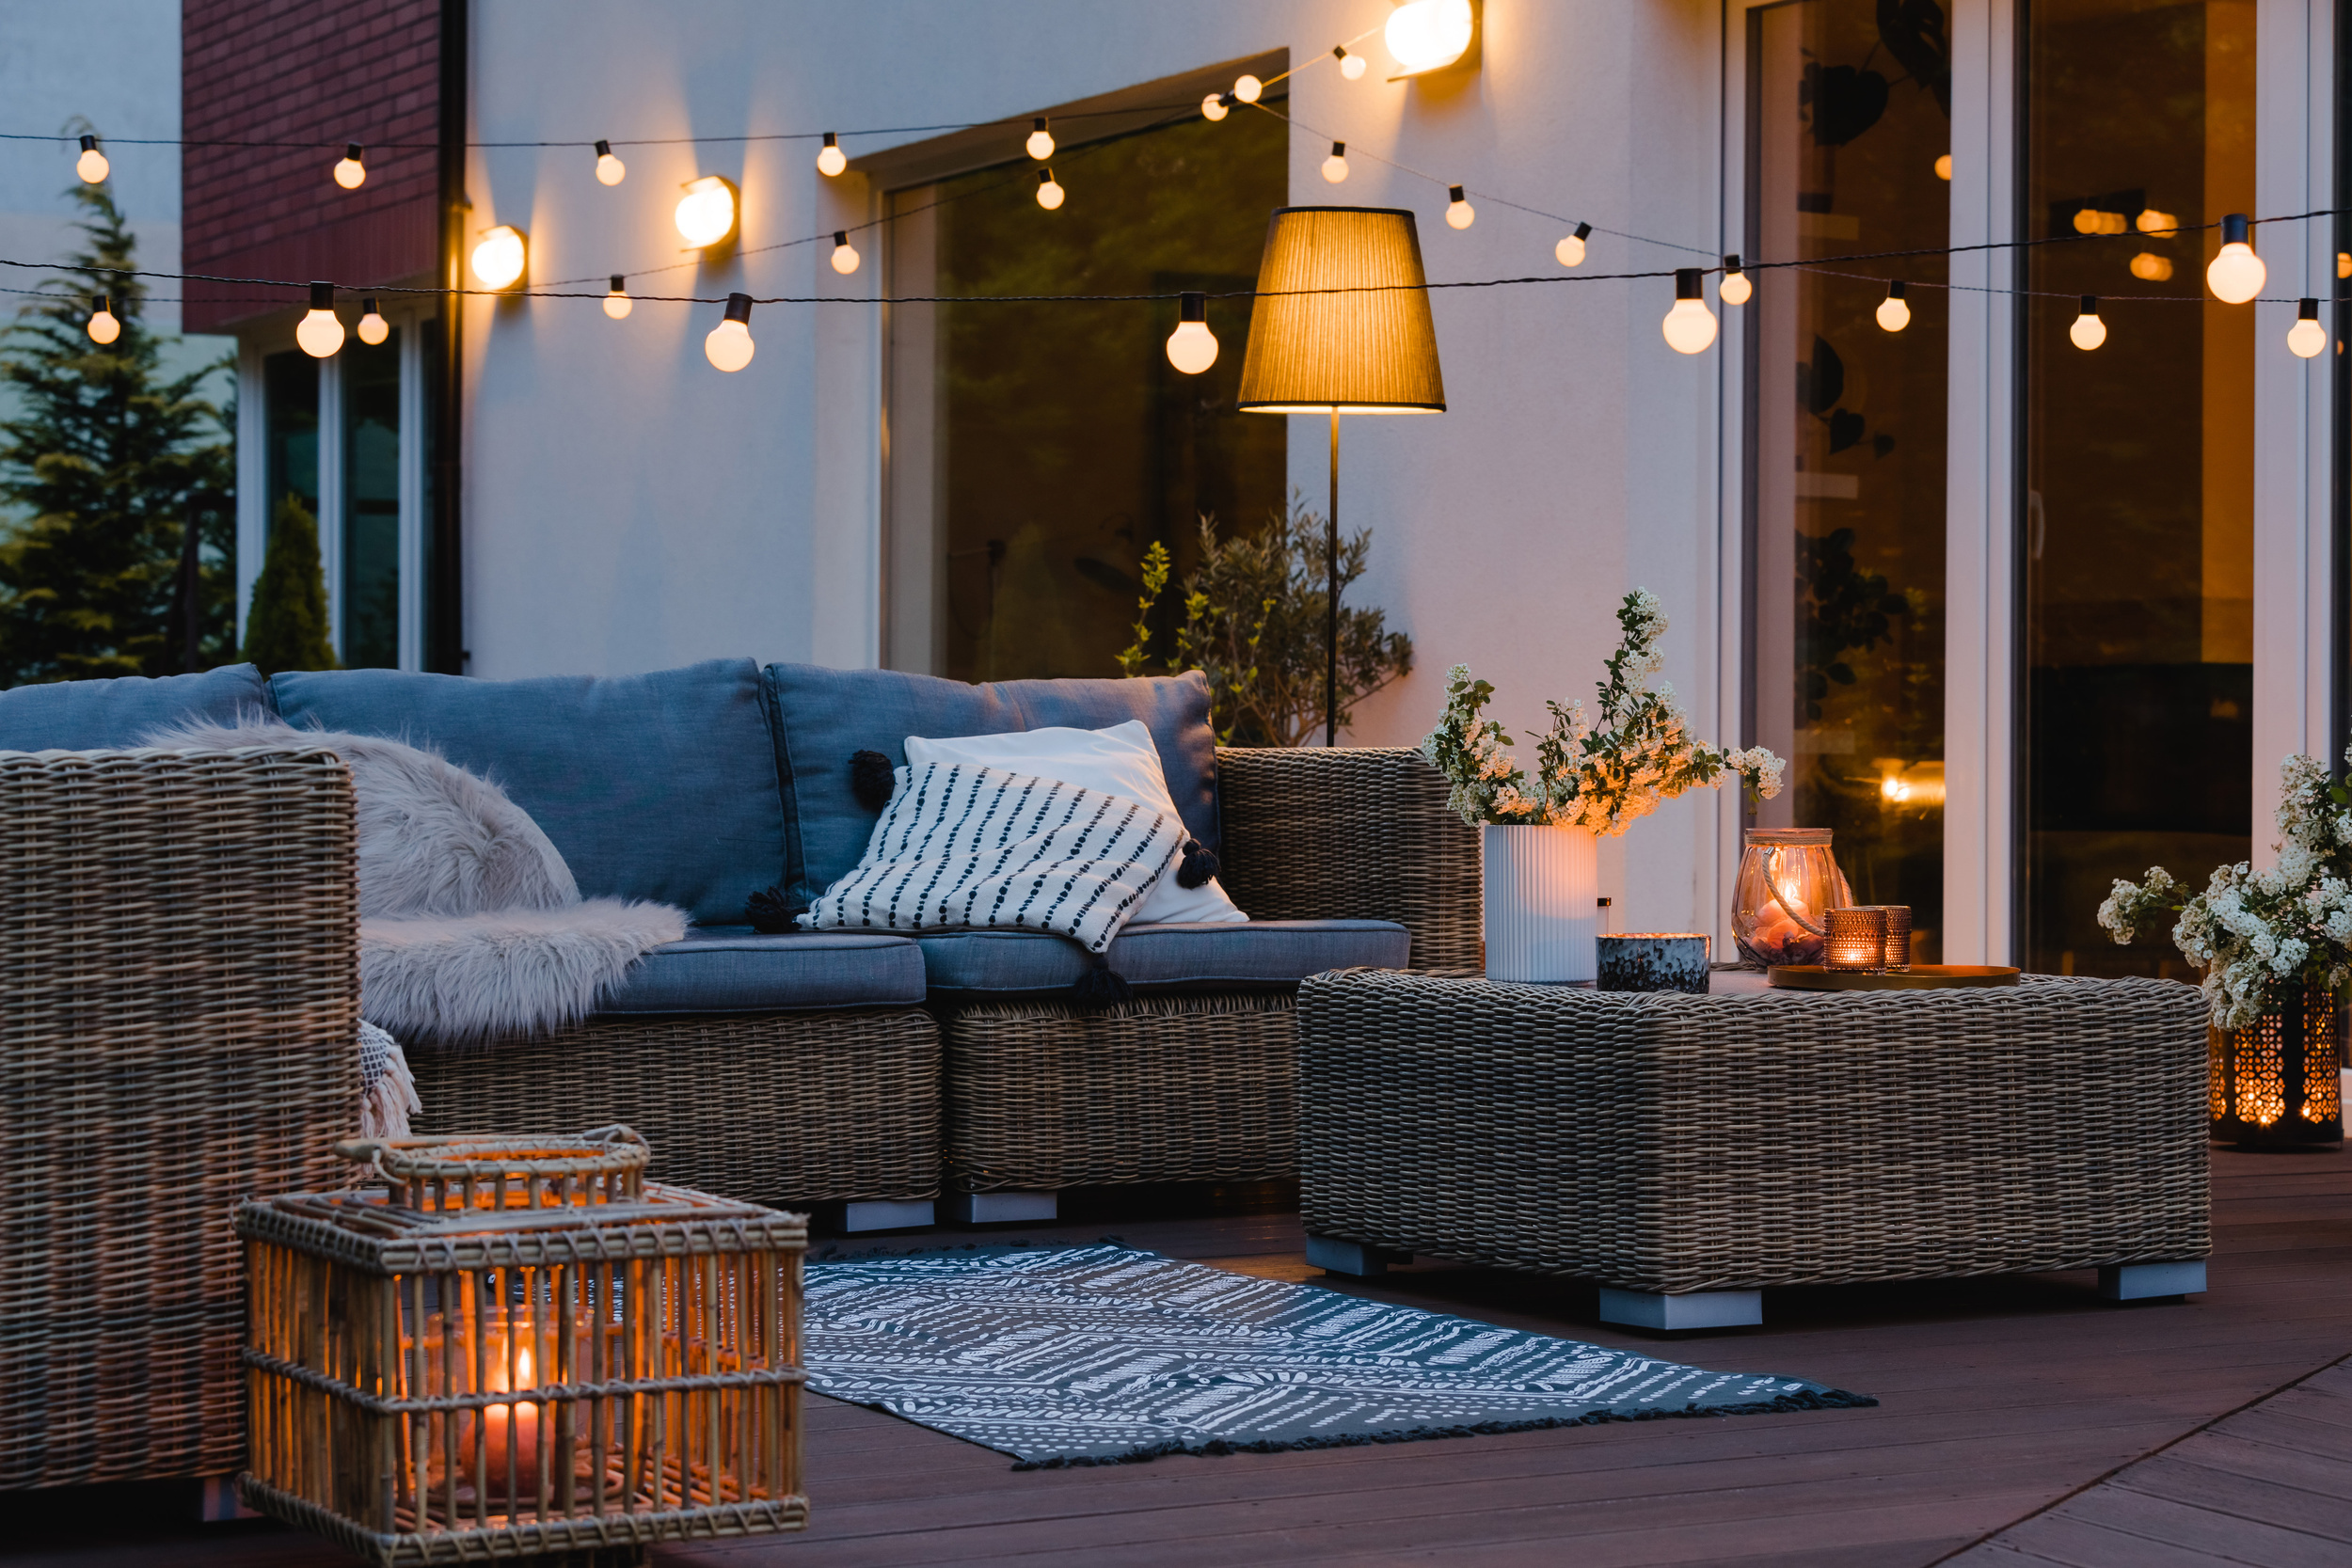 <p>“Patio” has a similar definition and pronunciation in English and Spanish. It refers to a small courtyard or garden area, which English speakers didn’t have a word for before borrowing from Spanish.</p><p>You may also like: <a href='https://www.yardbarker.com/lifestyle/articles/10_uses_for_a_waffle_iron_besides_making_waffles_123123/s1__21530566'>10 uses for a waffle iron besides making waffles</a></p>